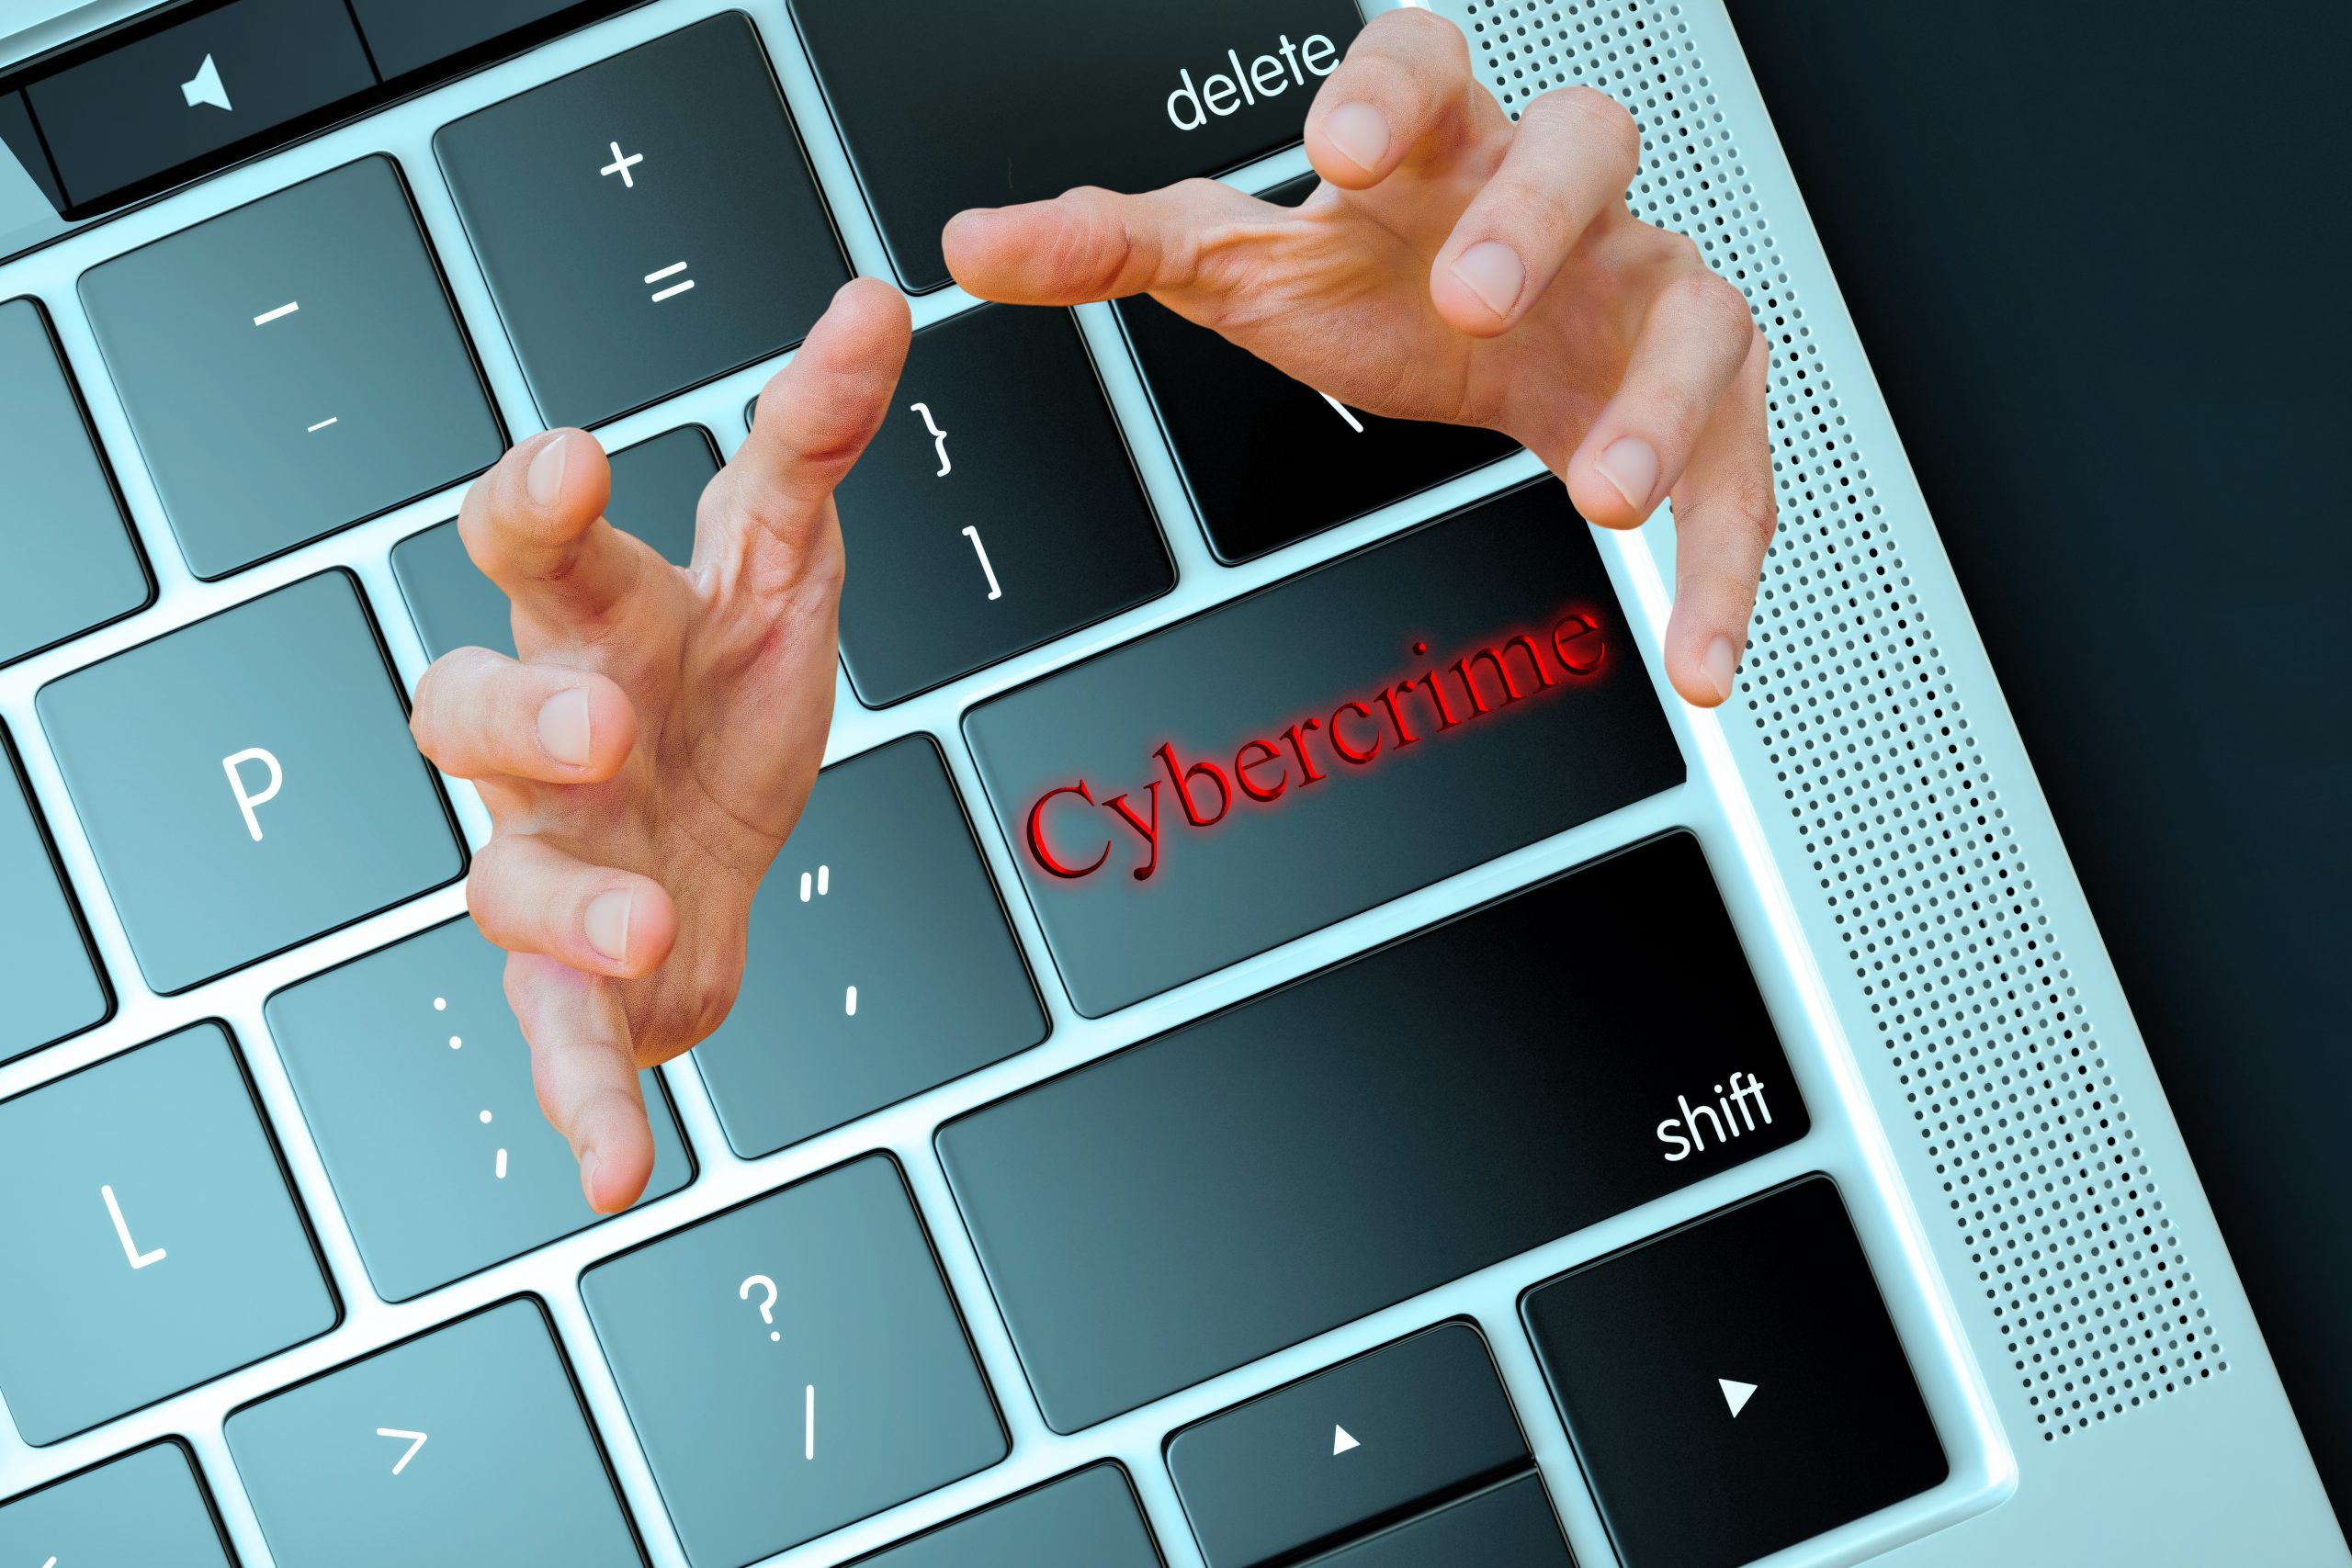 Cyber offences account for 20% of reported crimes in Spain